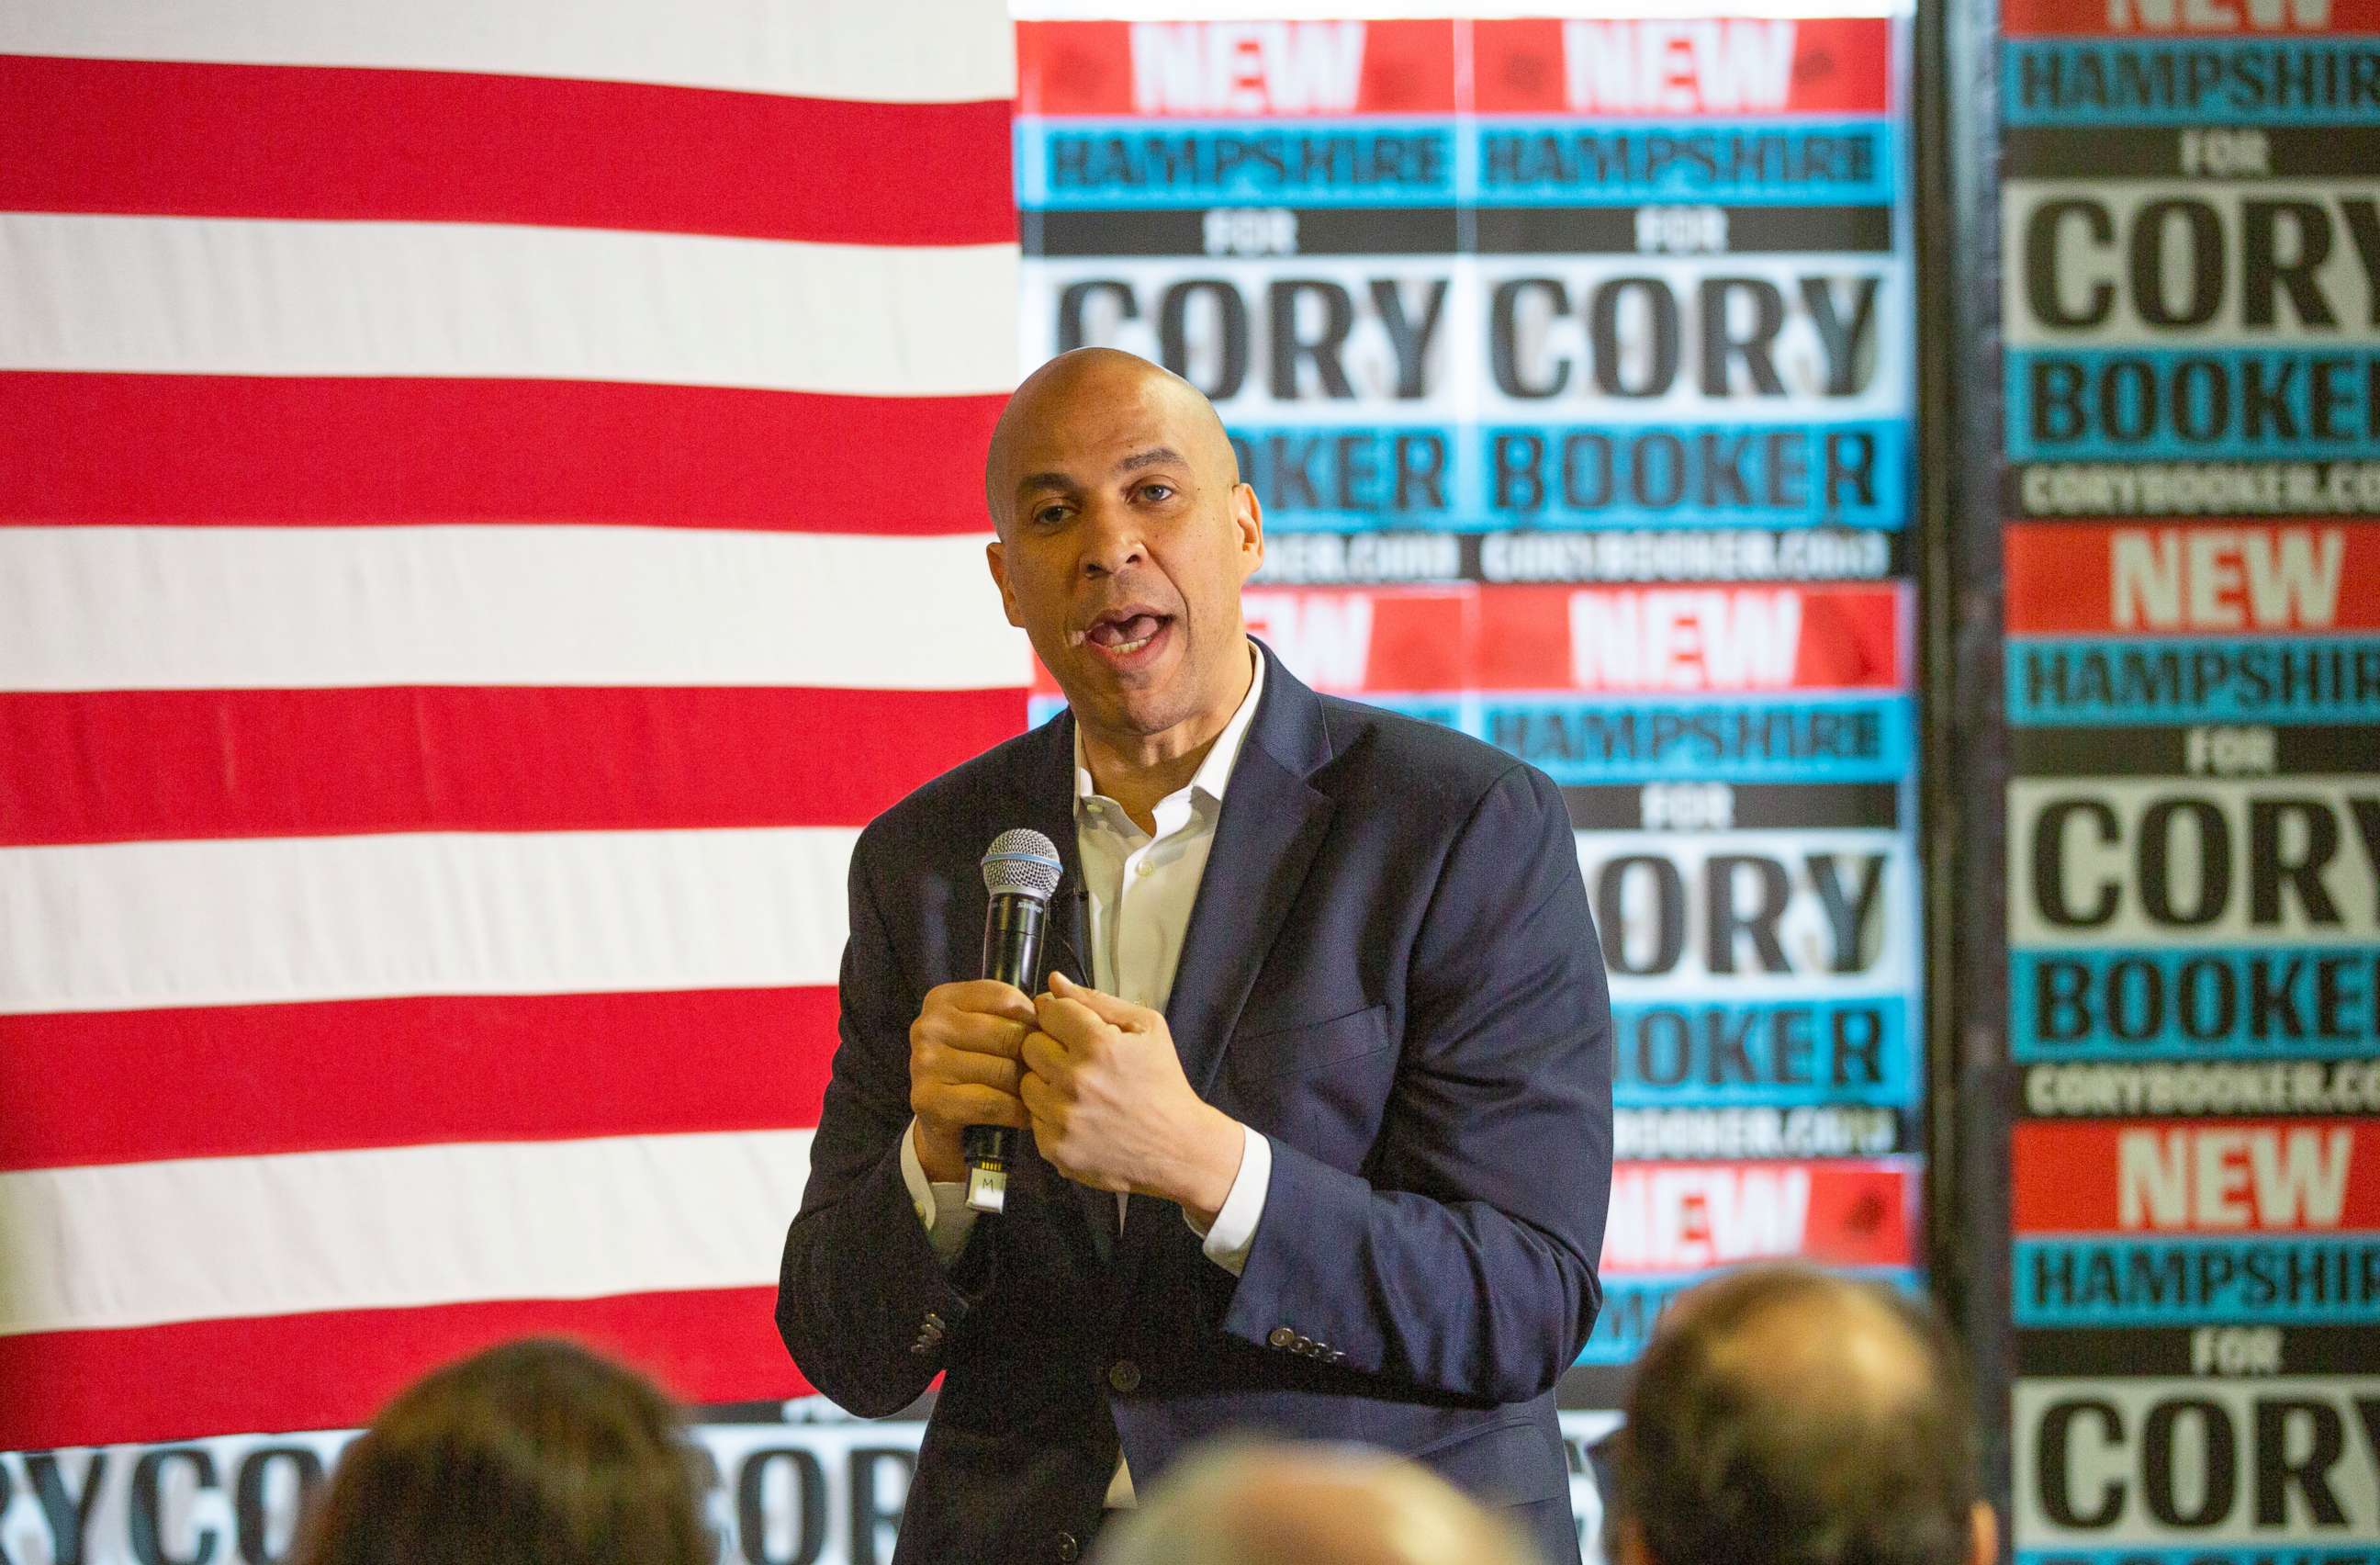 PHOTO: Cory Booker addresses voters at a campaign stop in Lebanon, N.H., March 15, 2019.